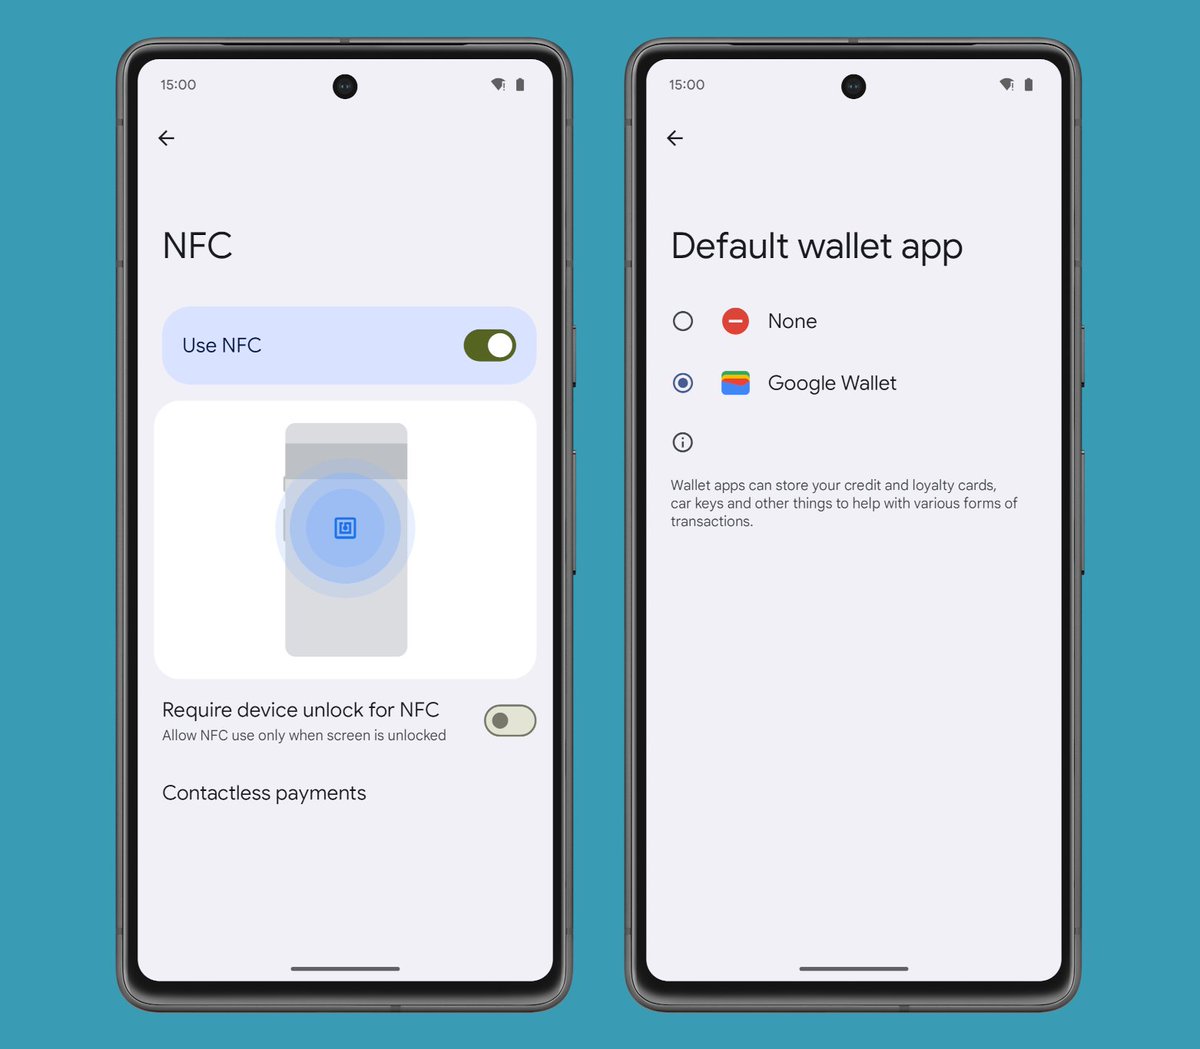 Android 15 Beta 1.1 is rolling out now with a fix for NFC! Contactless payments and other features that rely on NFC should now work. The update does NOT revert the NFC Mainline changes that I mentioned previously, but it fixes the botched migration.